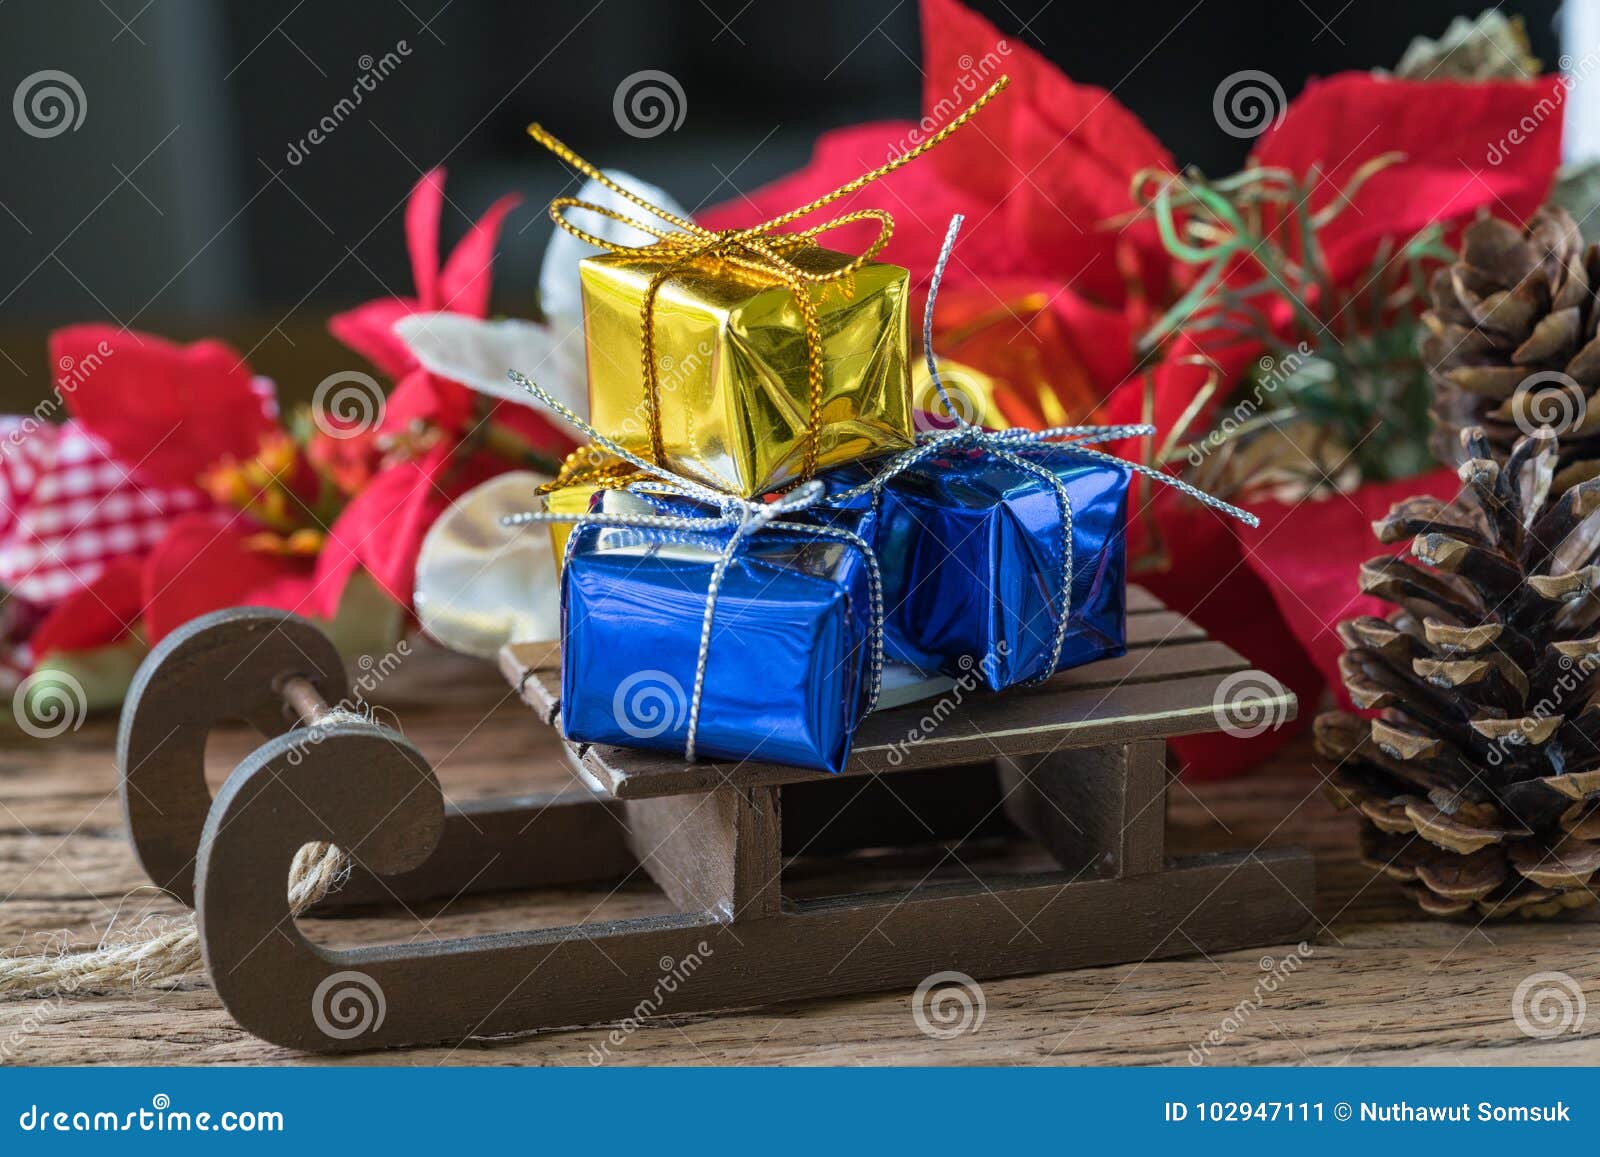 Miniature golden and blue present gift boxes on Santa claus sleigh as christmas eve celebration concept.